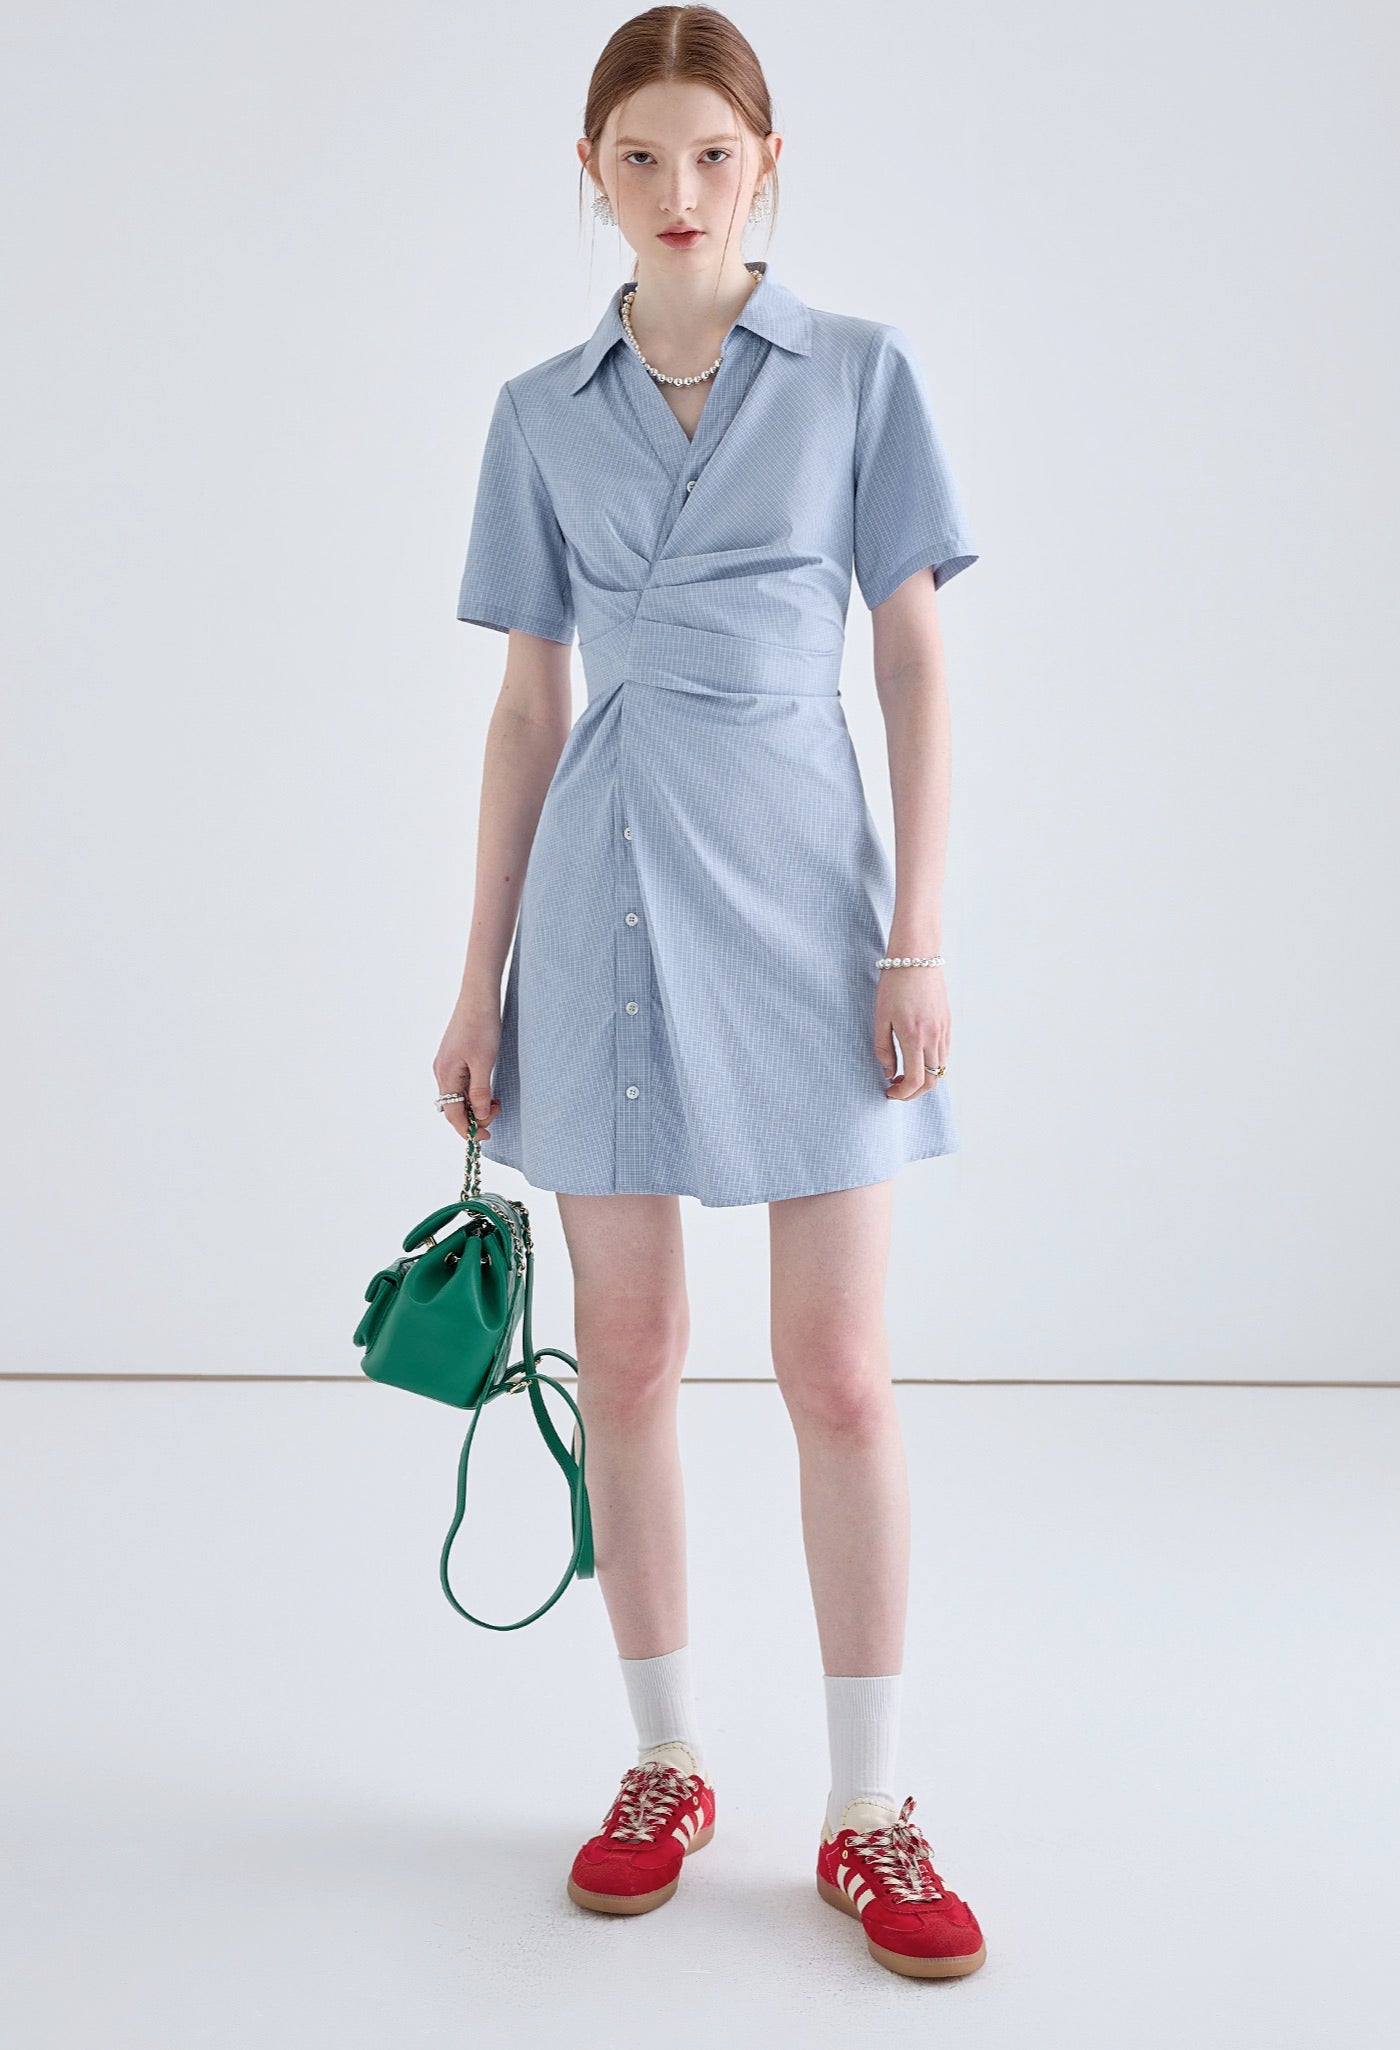 knotted,shirt,onepiece,blue,cute,cool,sexy,modern,simple